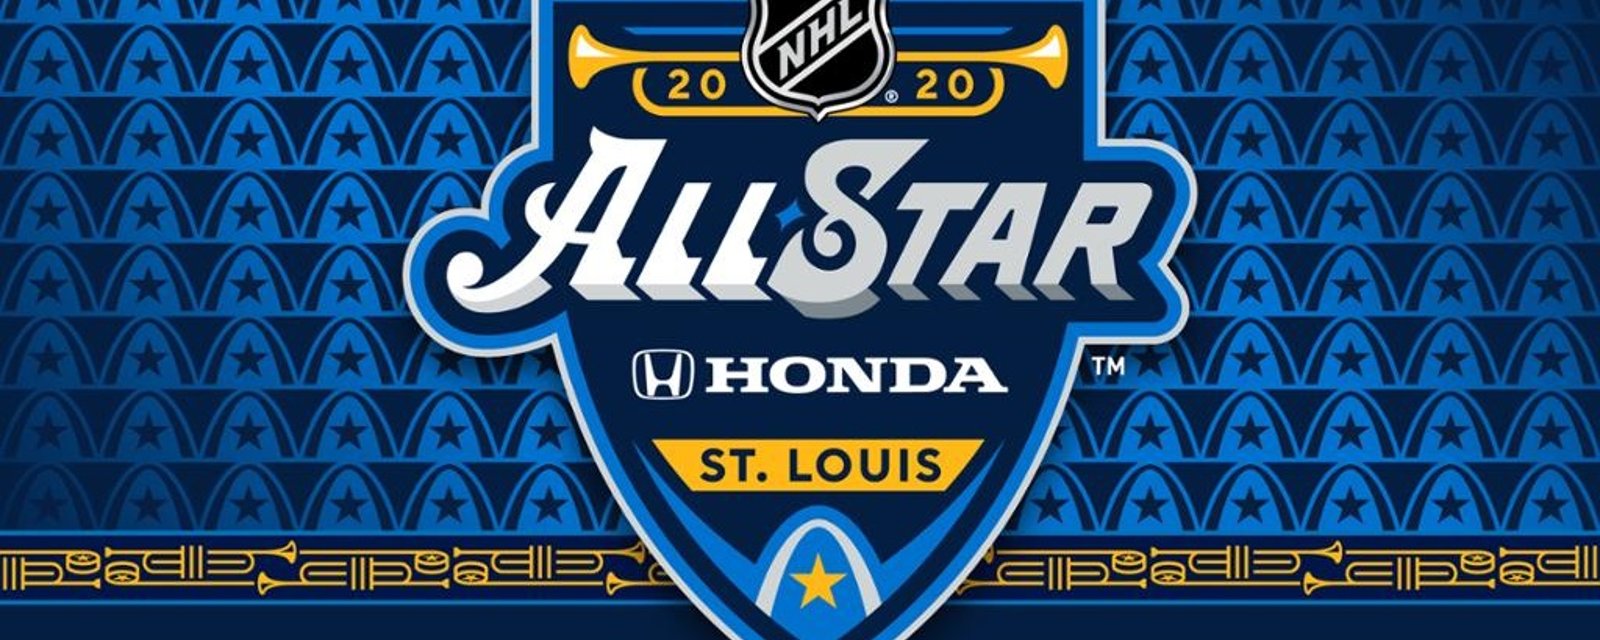 NHL All Star selections have been announced!